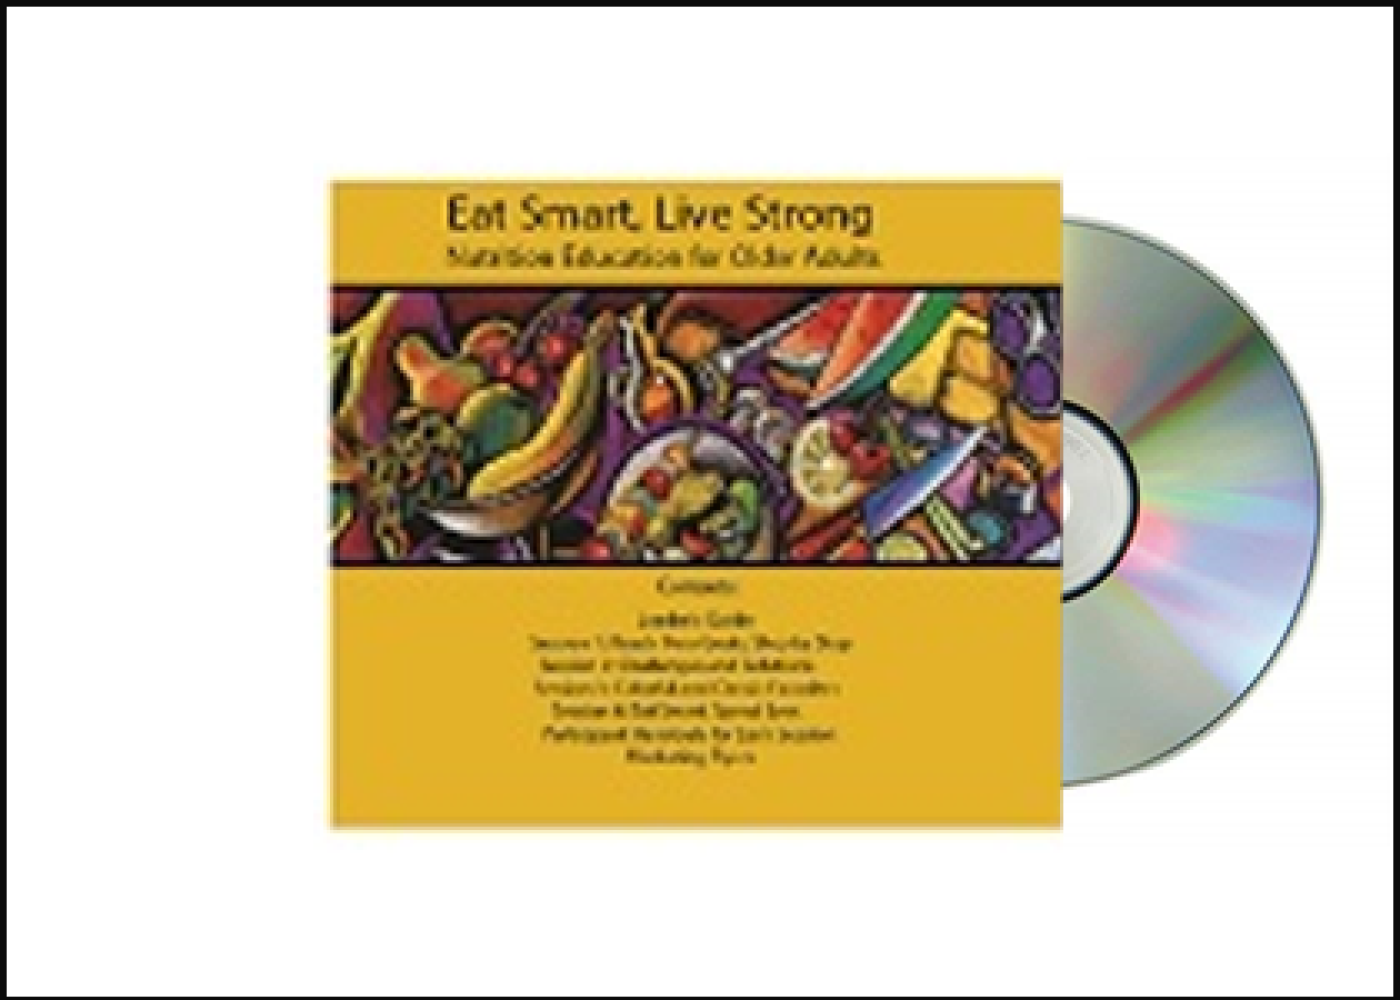 Eat Smart, Live Strong CD rom